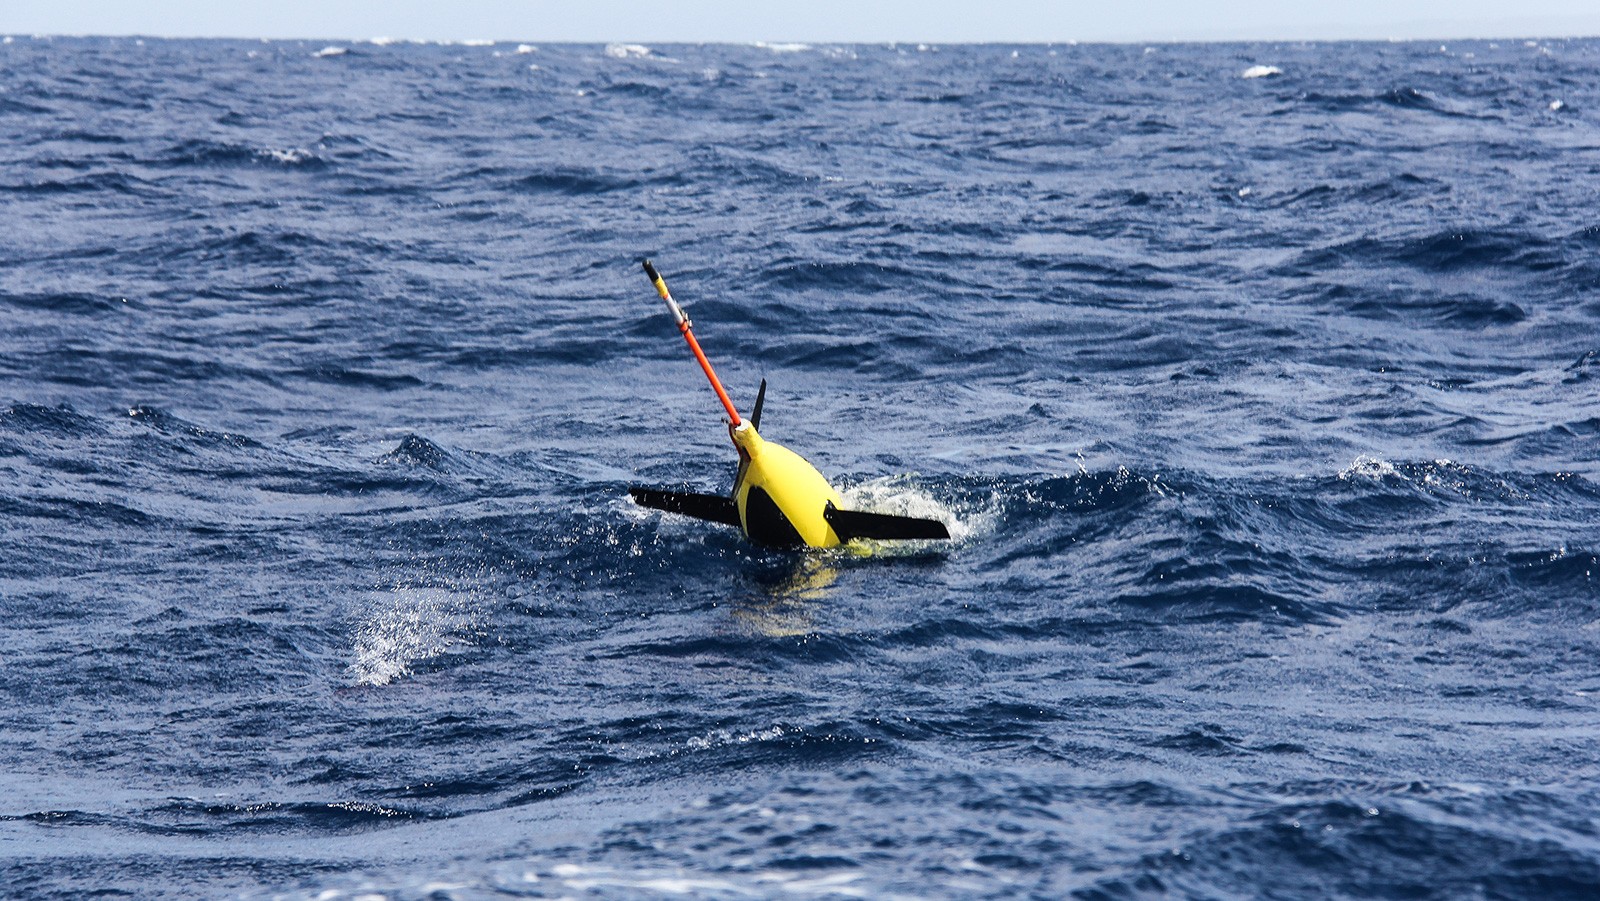 Underwater glider mission takes off in the waters of Puerto Rico. Image credit: NOAA